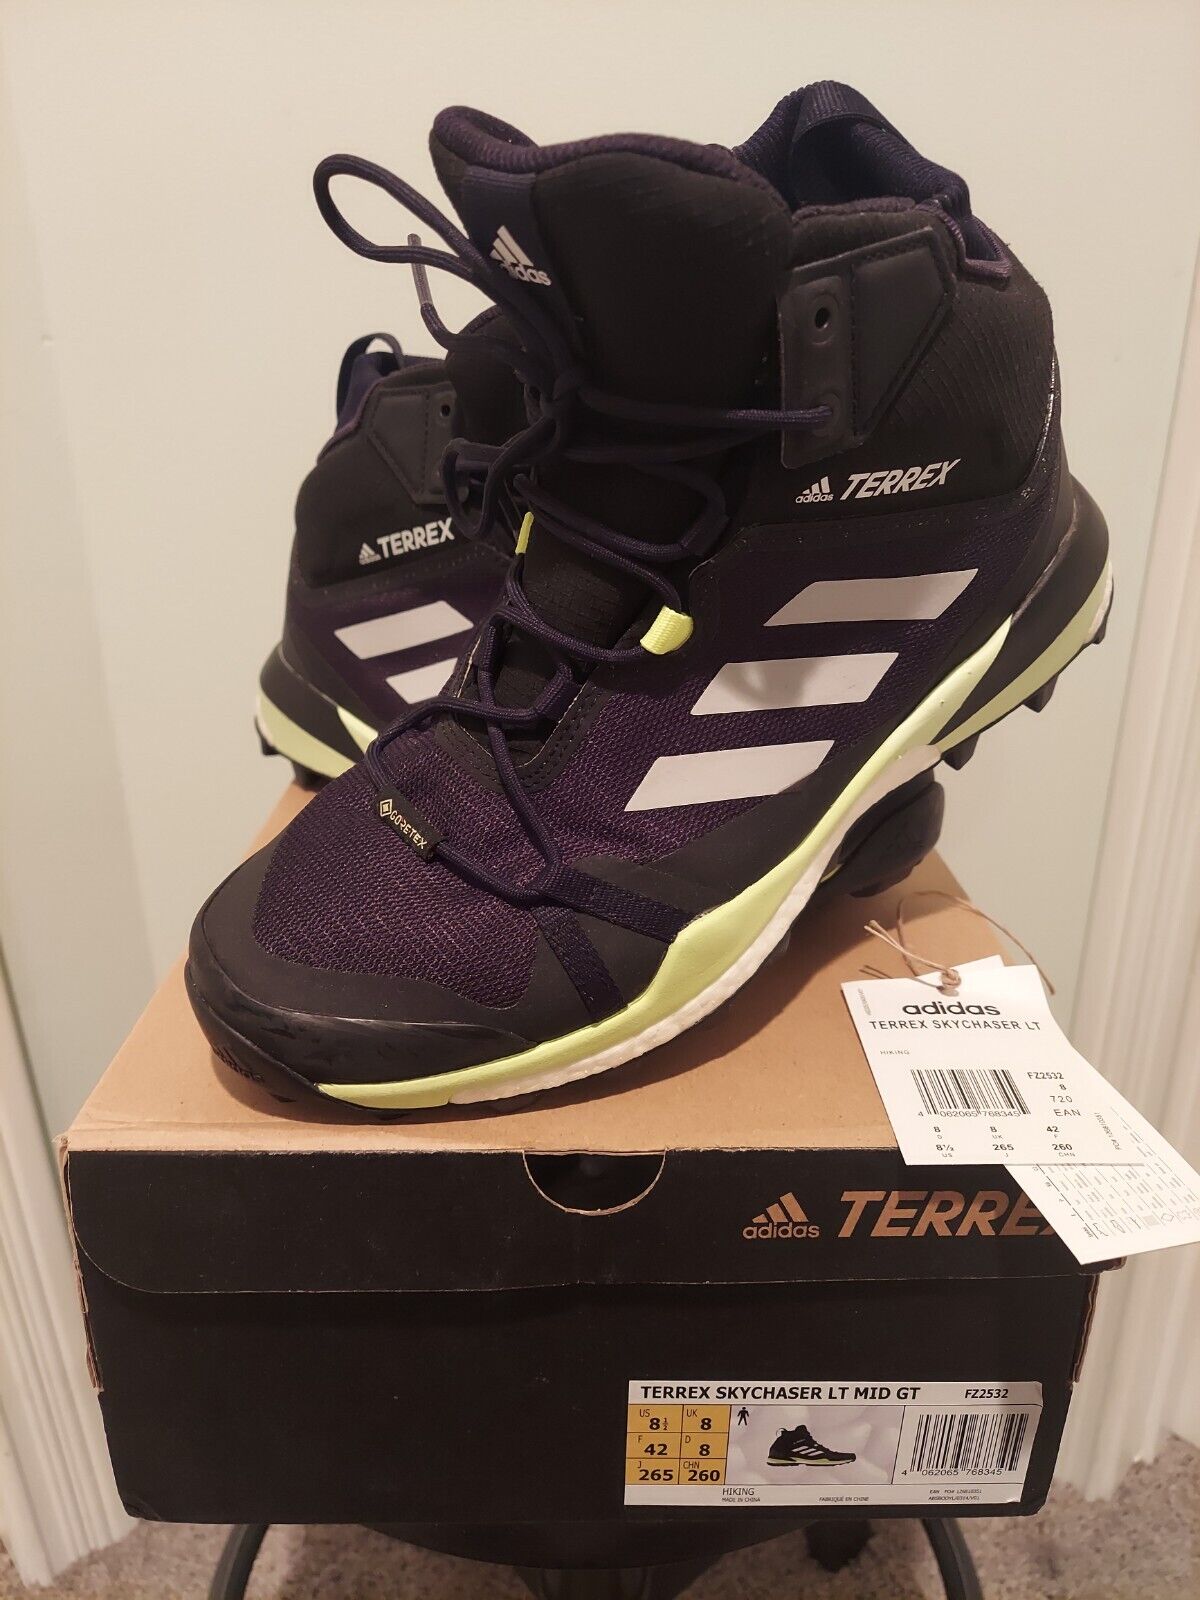 Mens Black ADIDAS TERREX SKYCHASER MID Hiking Shoes 8.5 W/Box Excellent! | eBay